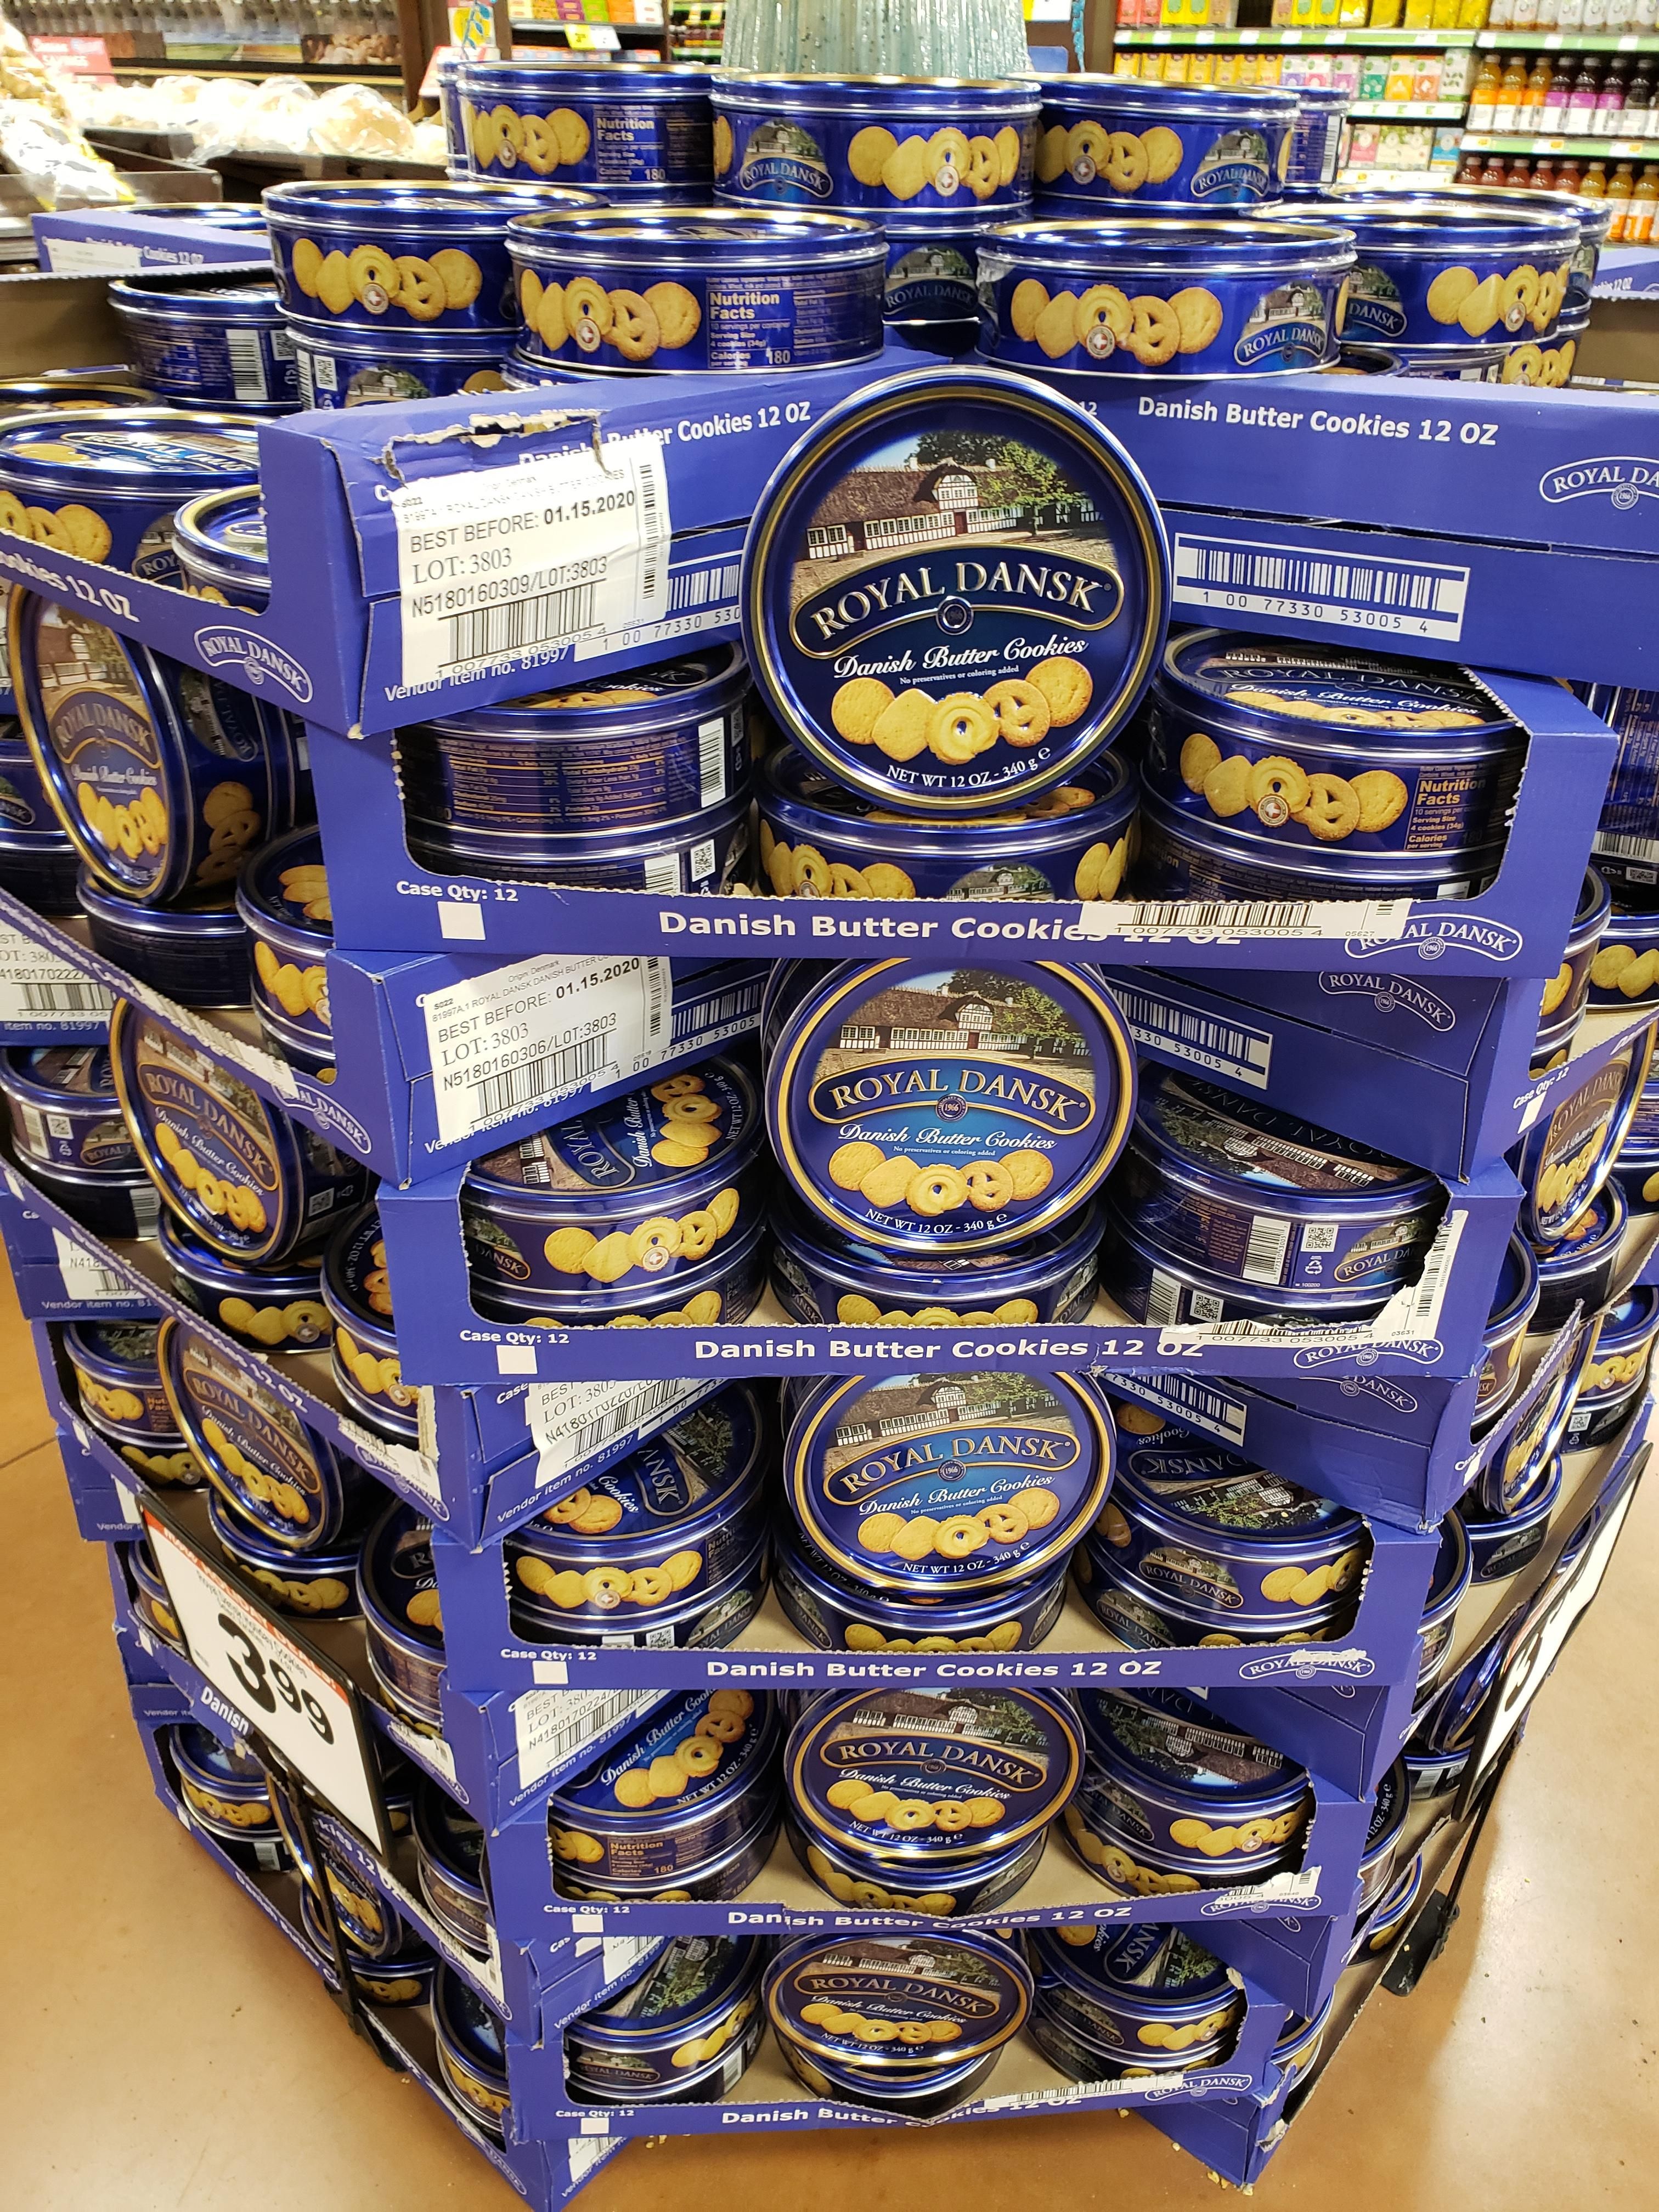 So much sewing supplies in one display stand.